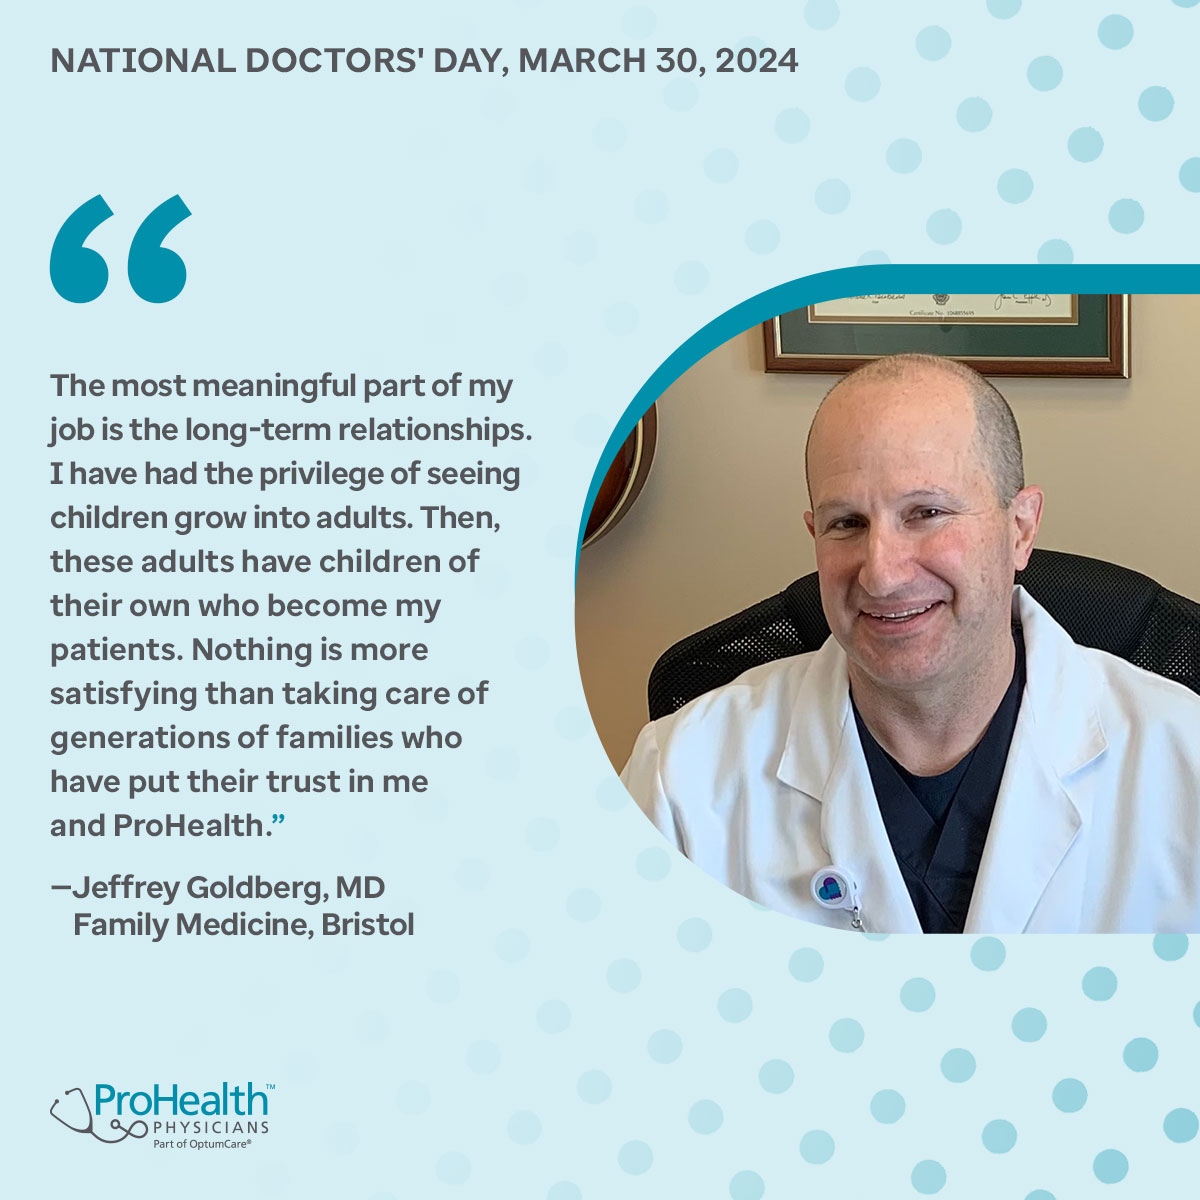 Today is #NationalDoctorsDay! Our team of doctors knows how important patient relationships are. That's why they treat you when you're sick, but care for you always. Check out what Dr. Jeffrey Goldberg says is the most meaningful part of being a doctor. To all of our docto...